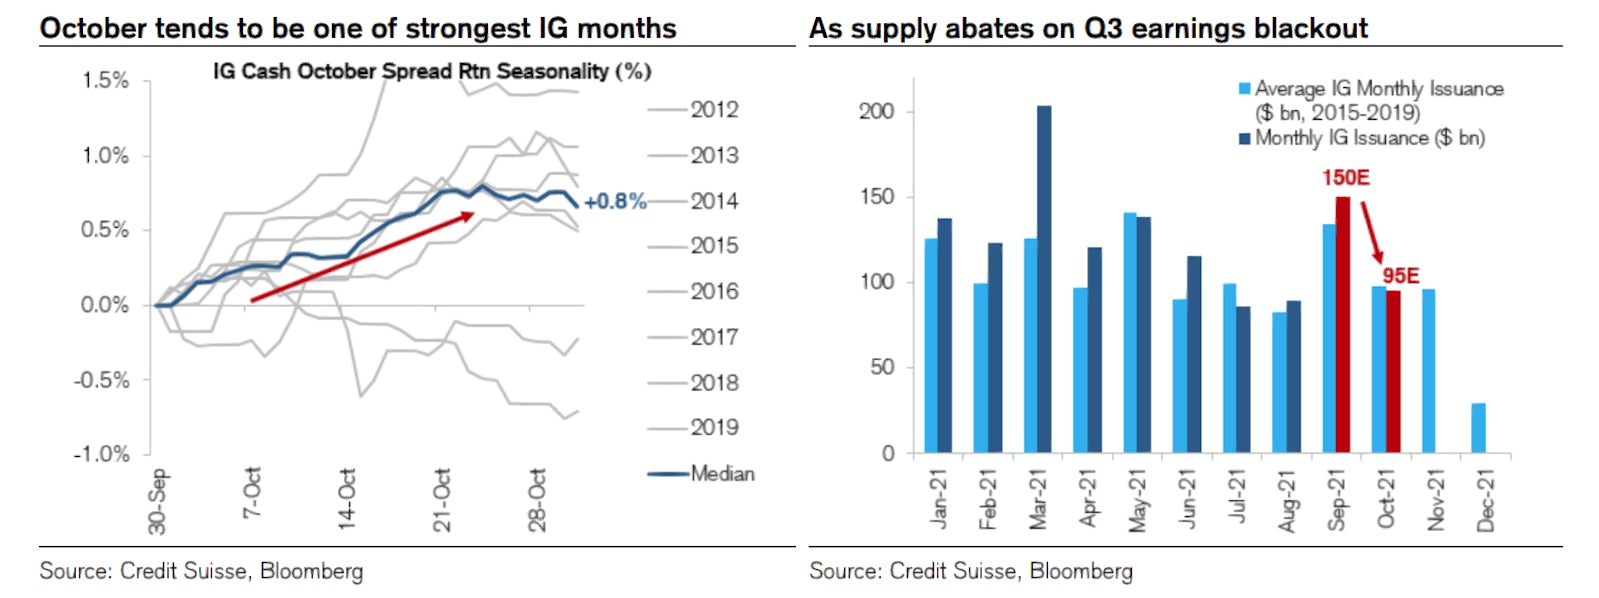 Seasonality Is Favorable To USD Investment Grade Bonds | Source: Credit Suisse